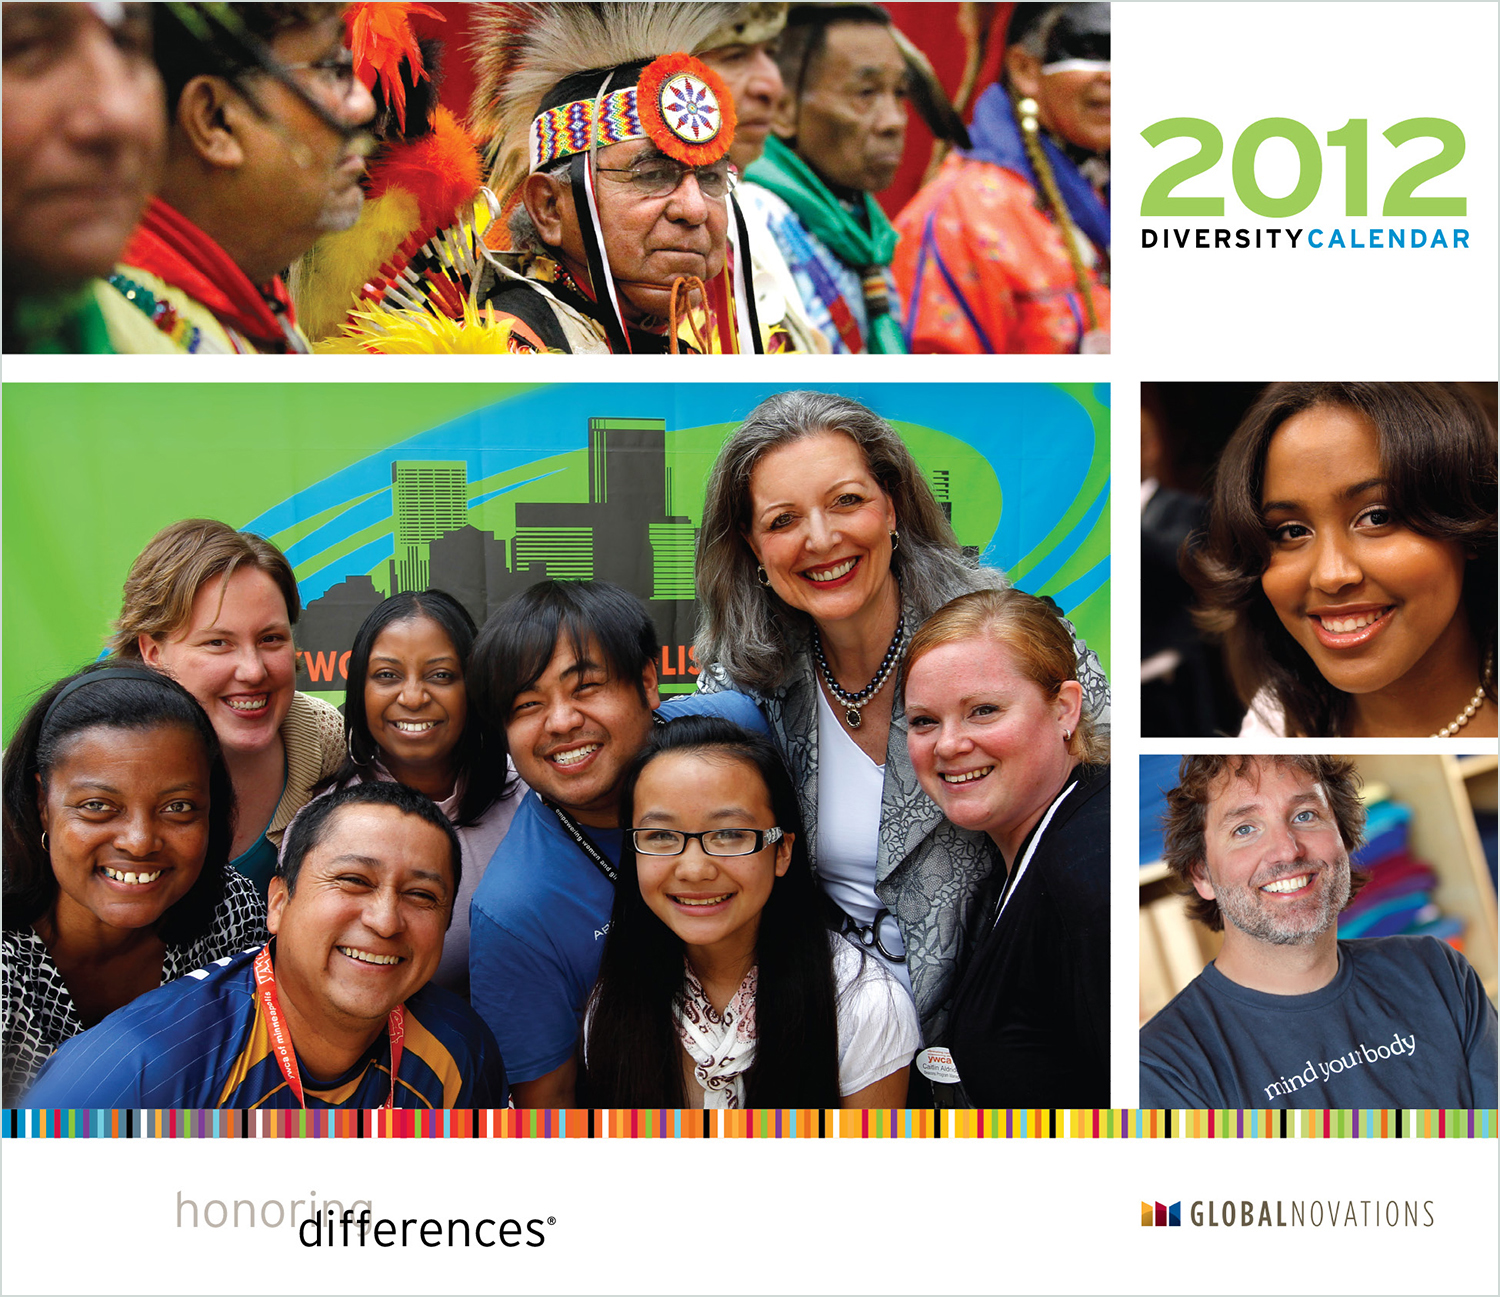  Cover of  Honoring Differences  diversity calendar for Global Novations; provided art direction for photo shoots 